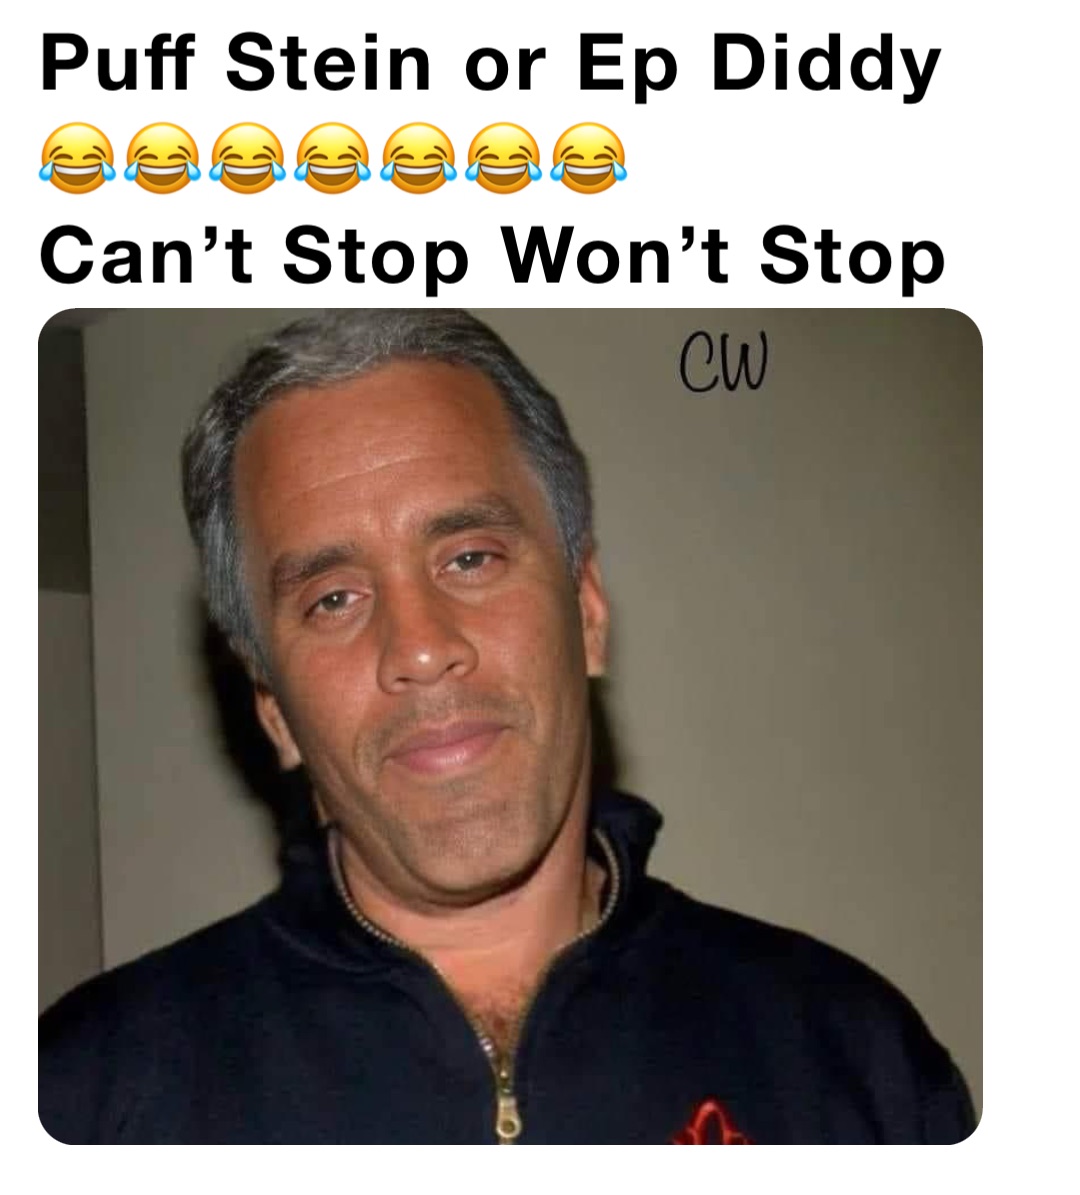 Puff Stein or Ep Diddy 
😂😂😂😂😂😂😂
Can’t Stop Won’t Stop